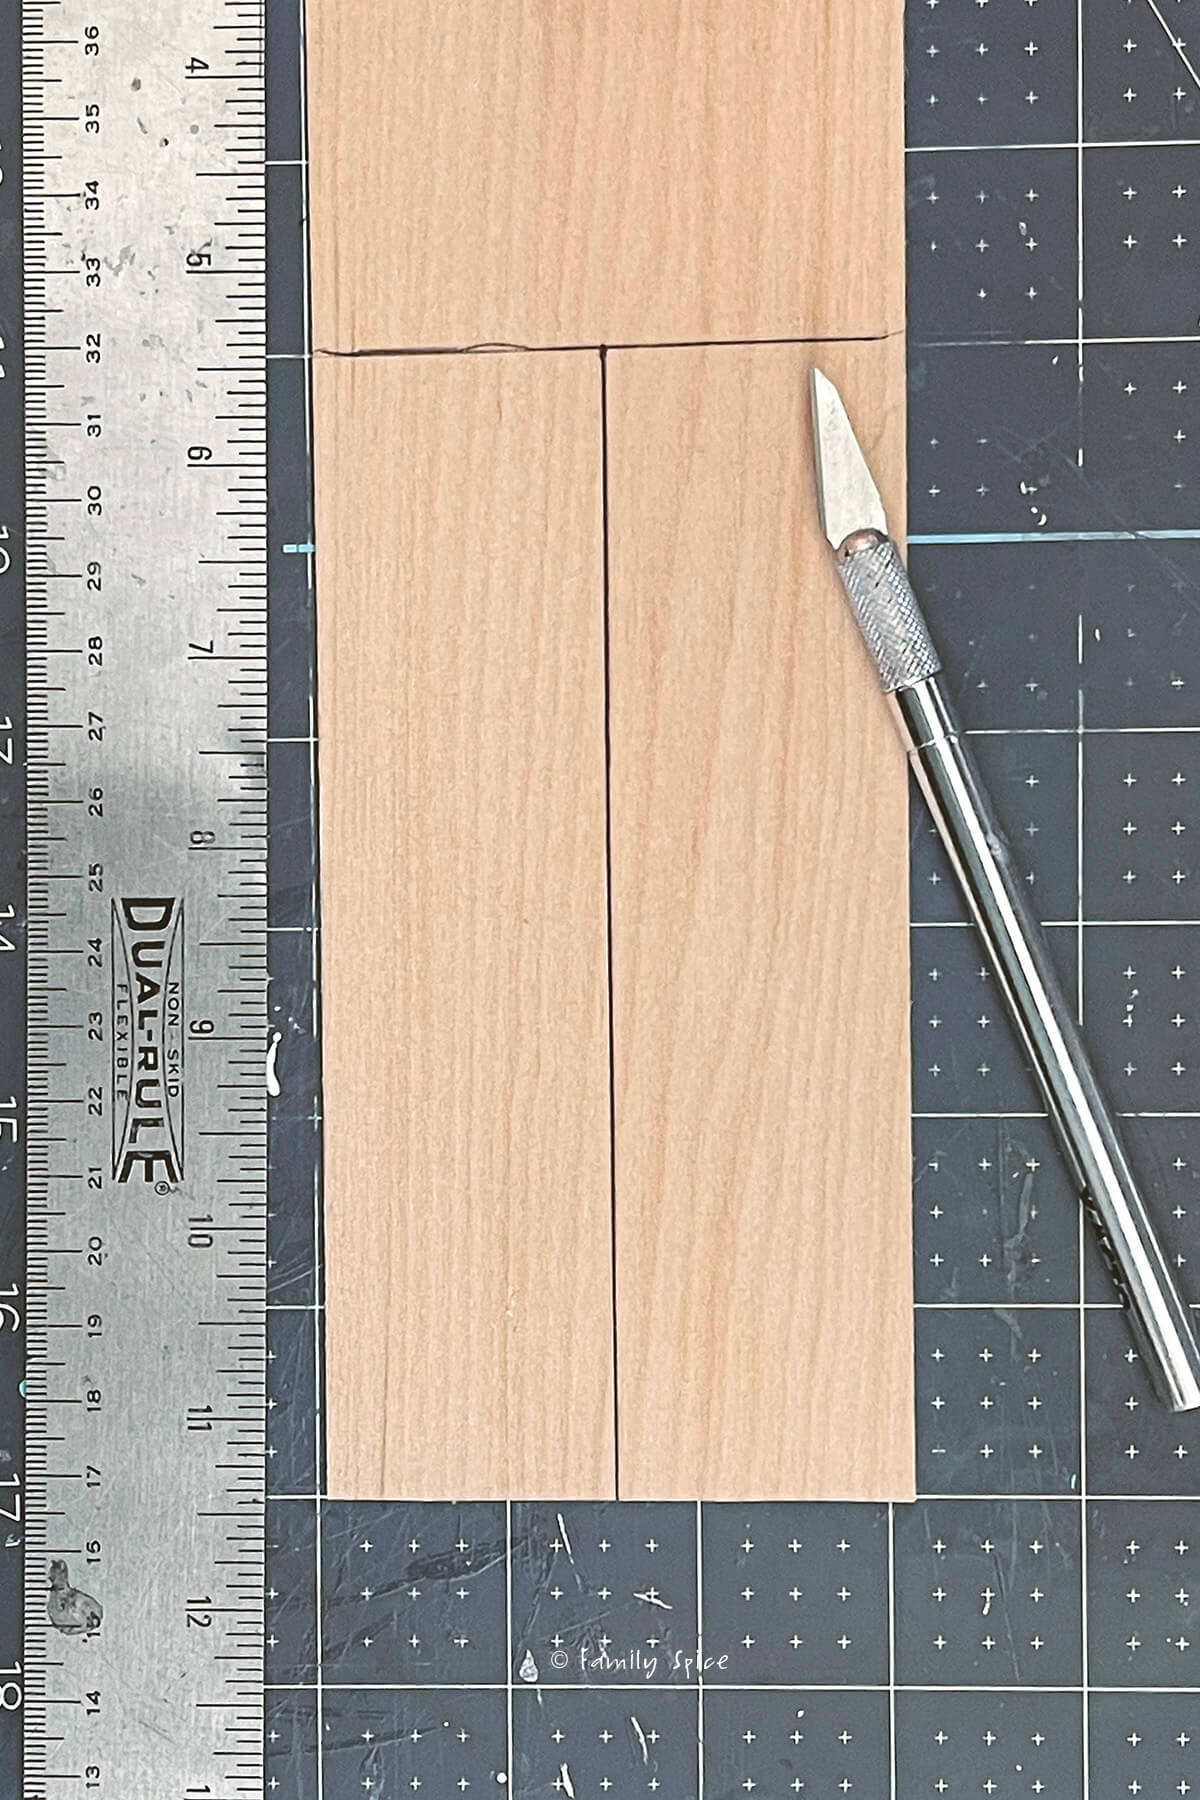 Marking lines to cut on a sheet of basswood